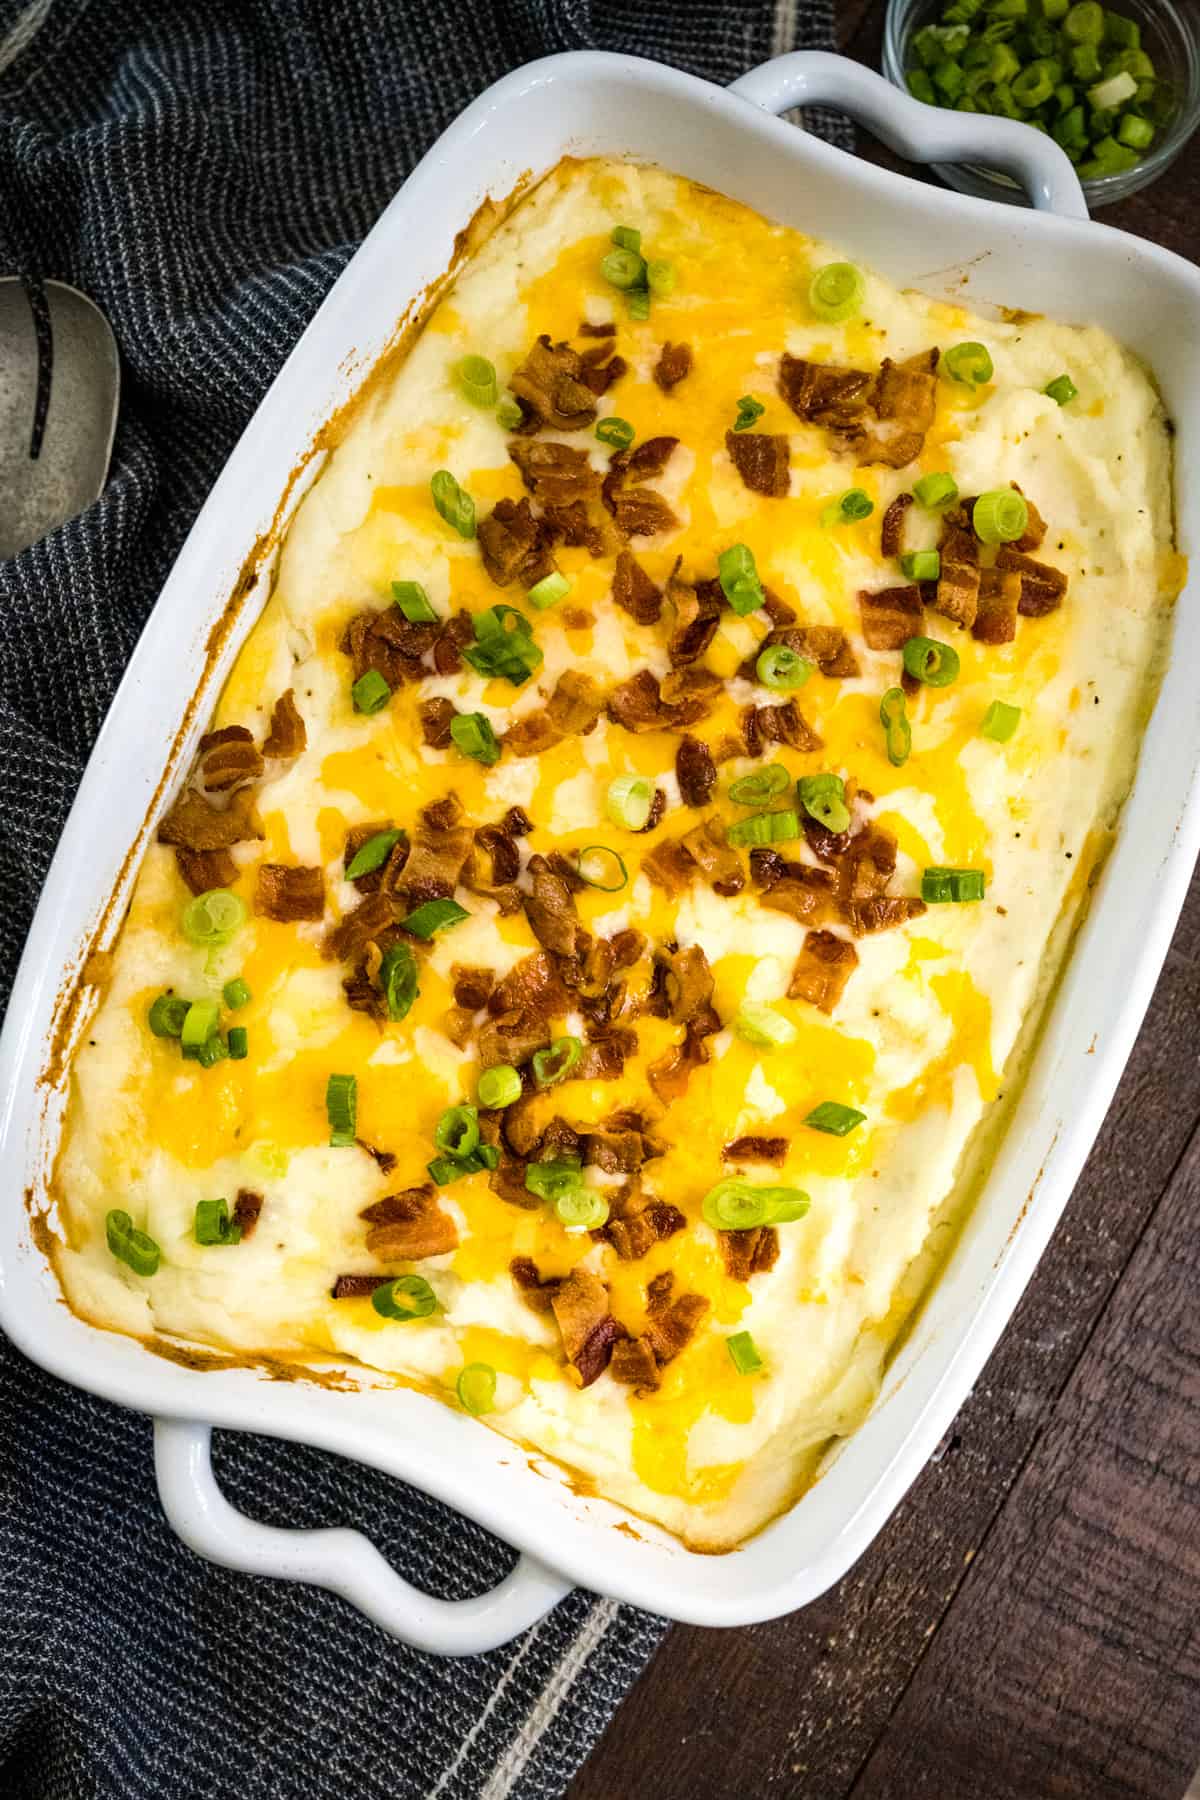 Casserole dish filled with baked loaded mashed potatoes topped with melted cheese, bacon and chives.